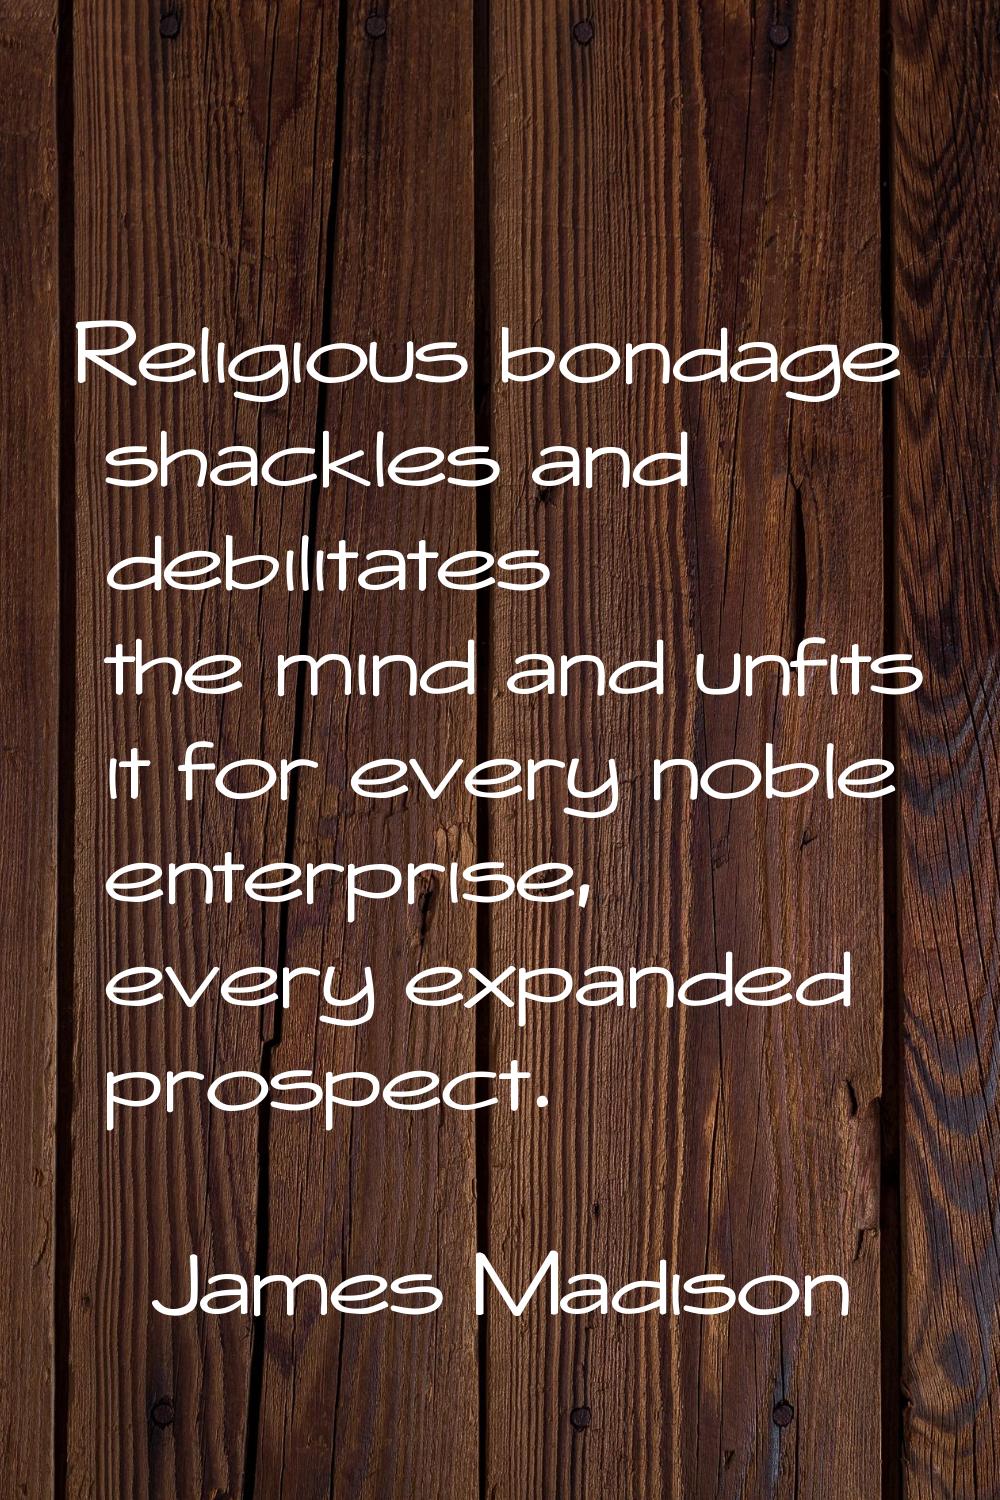 Religious bondage shackles and debilitates the mind and unfits it for every noble enterprise, every